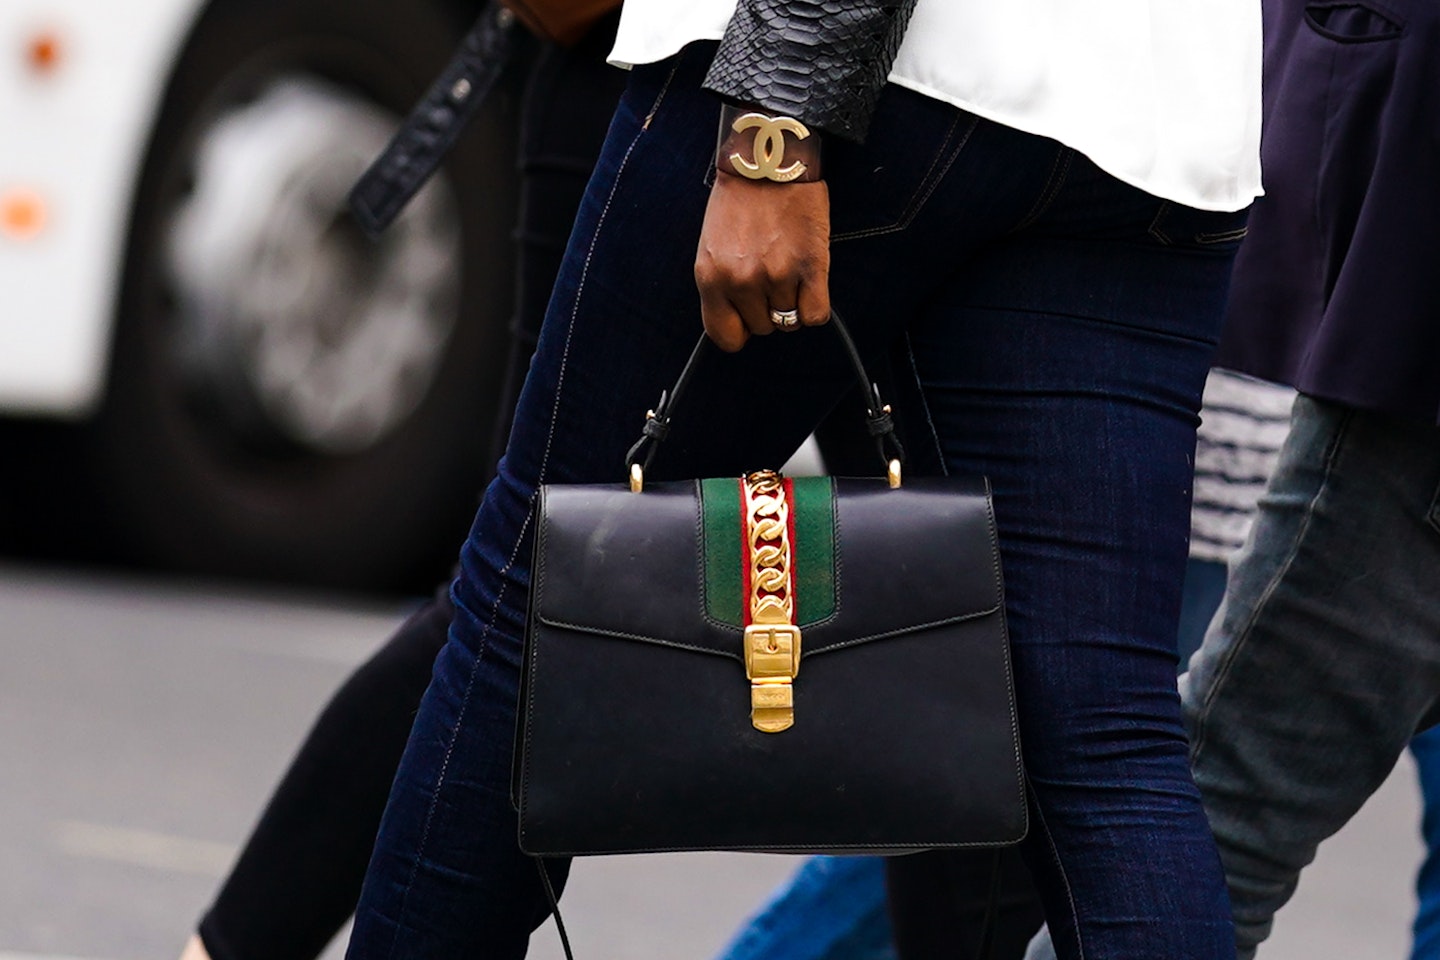 Fendi dupes that are way cheaper than the originals